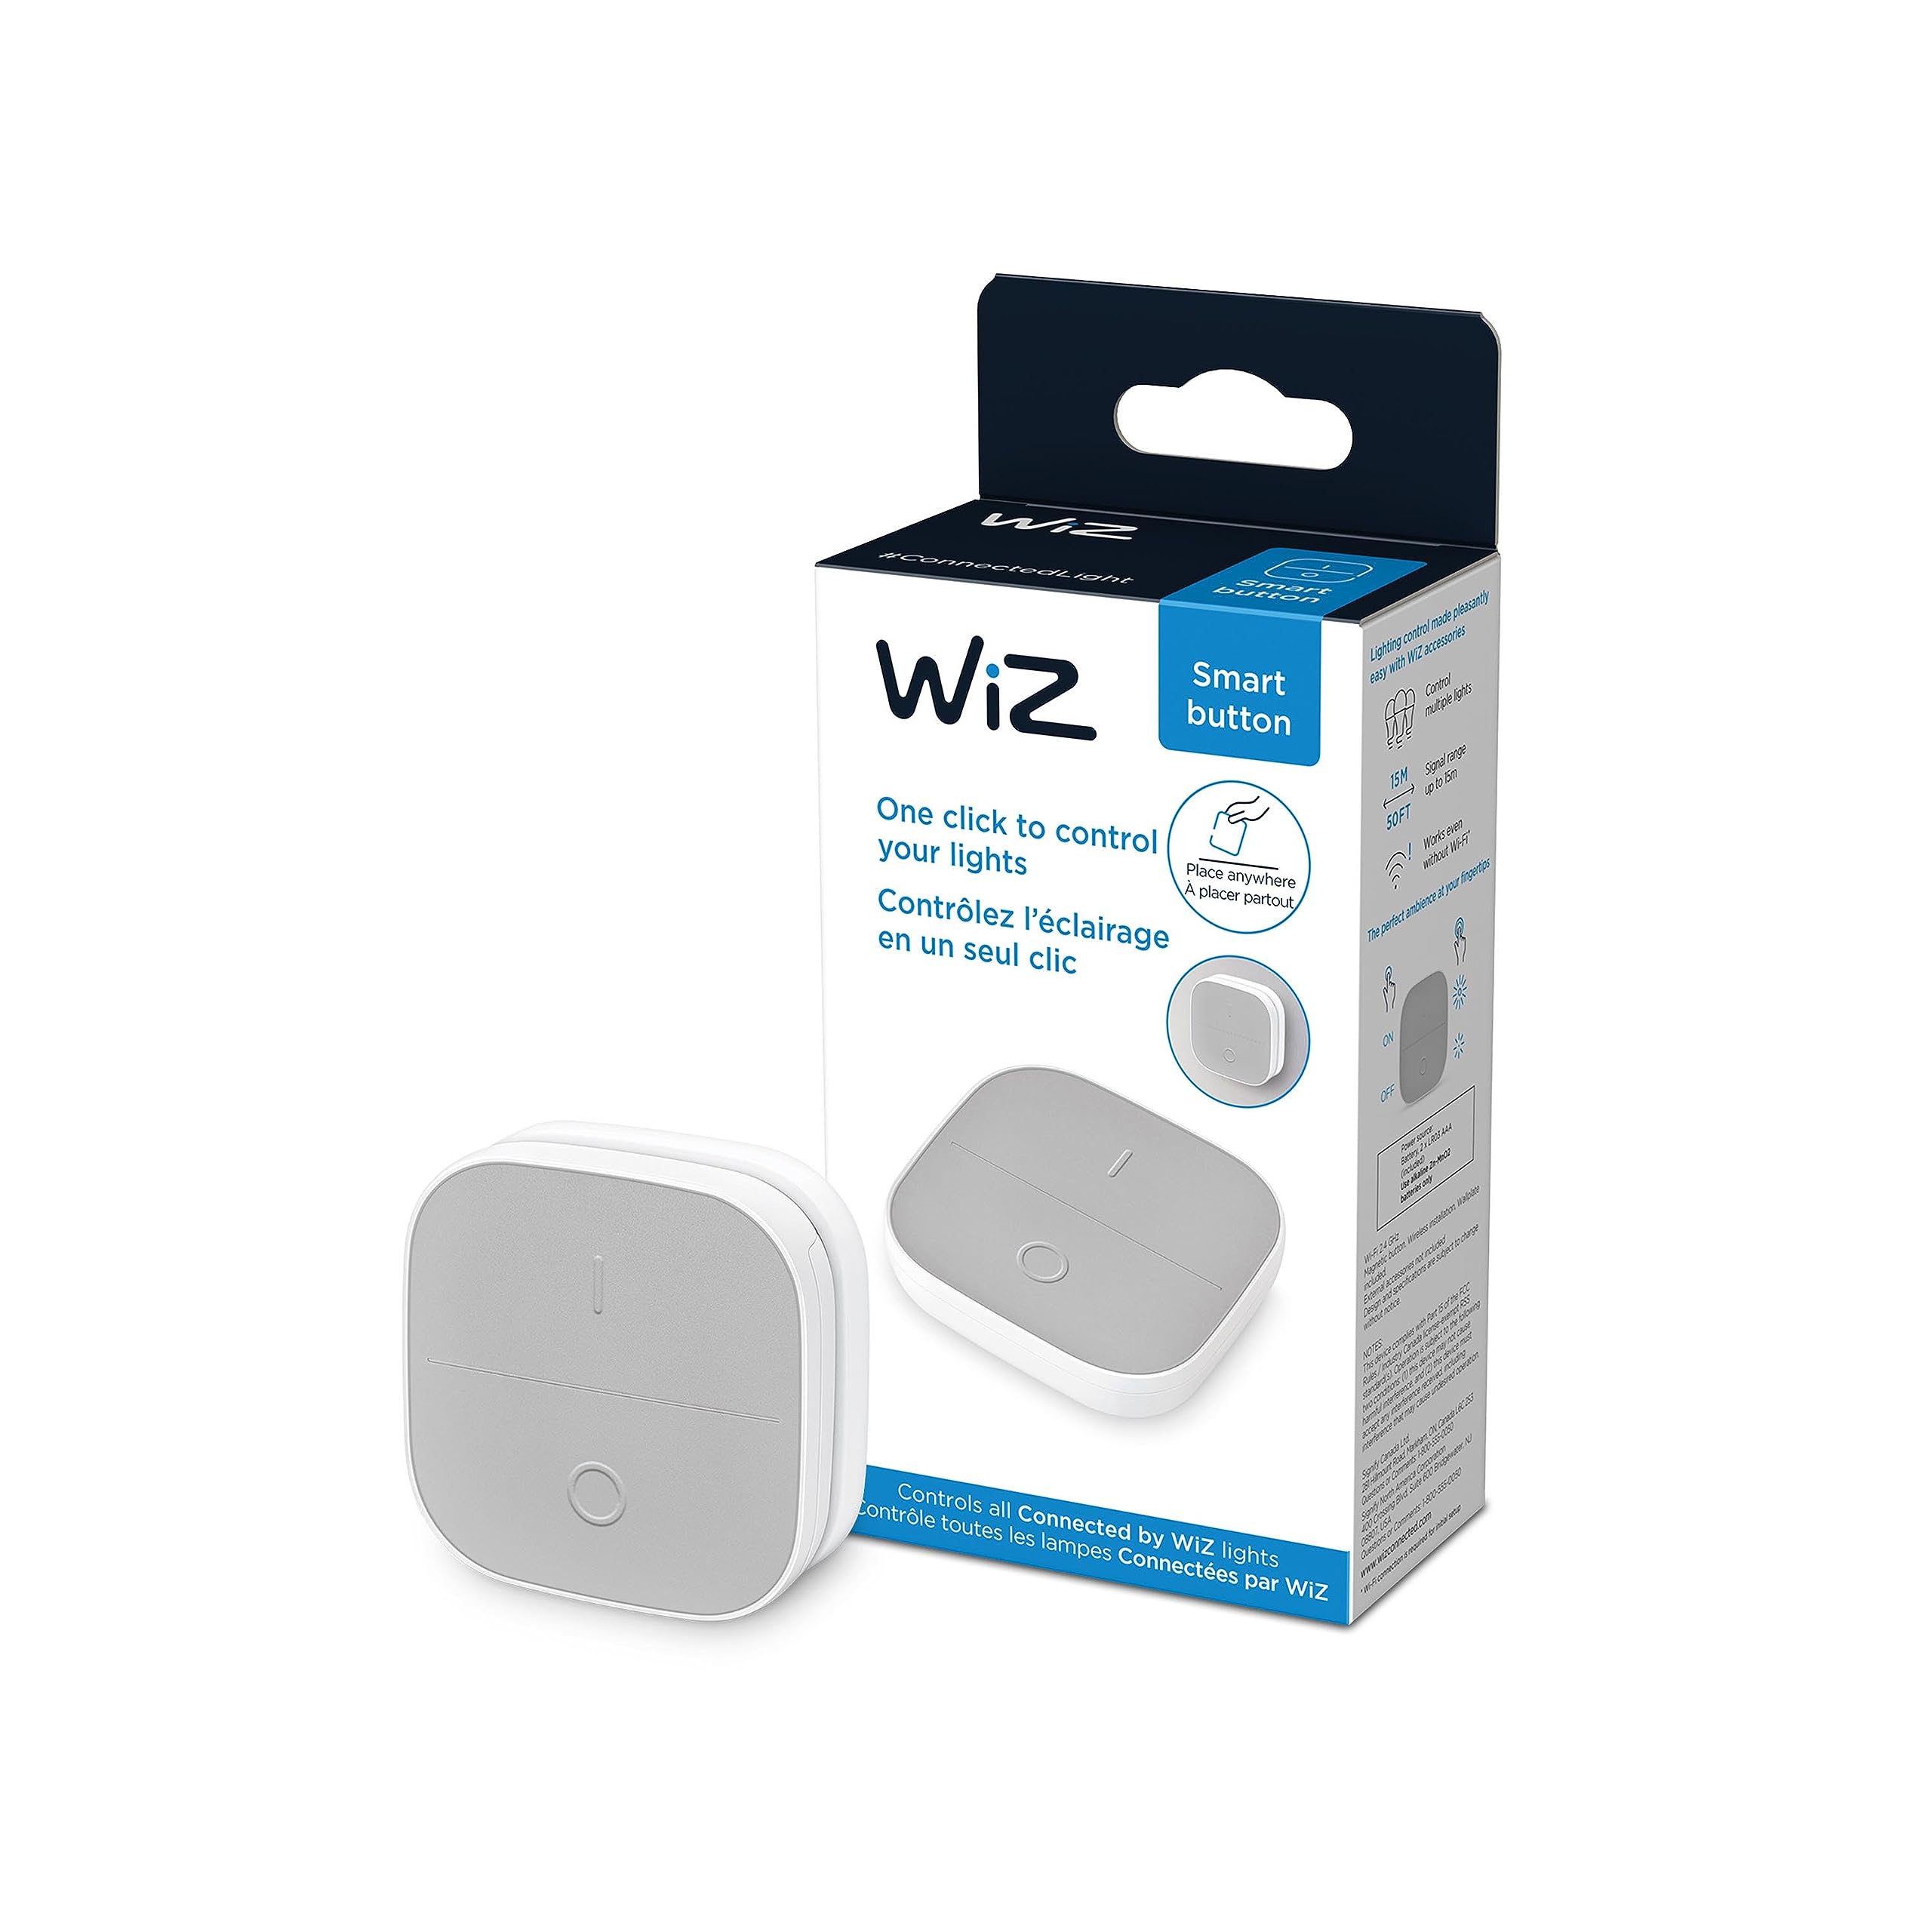 WiZ Connected Portable Button - Pack of 1 - Smart Control with WiZ V2 App and 2.4Ghz Wi-Fi